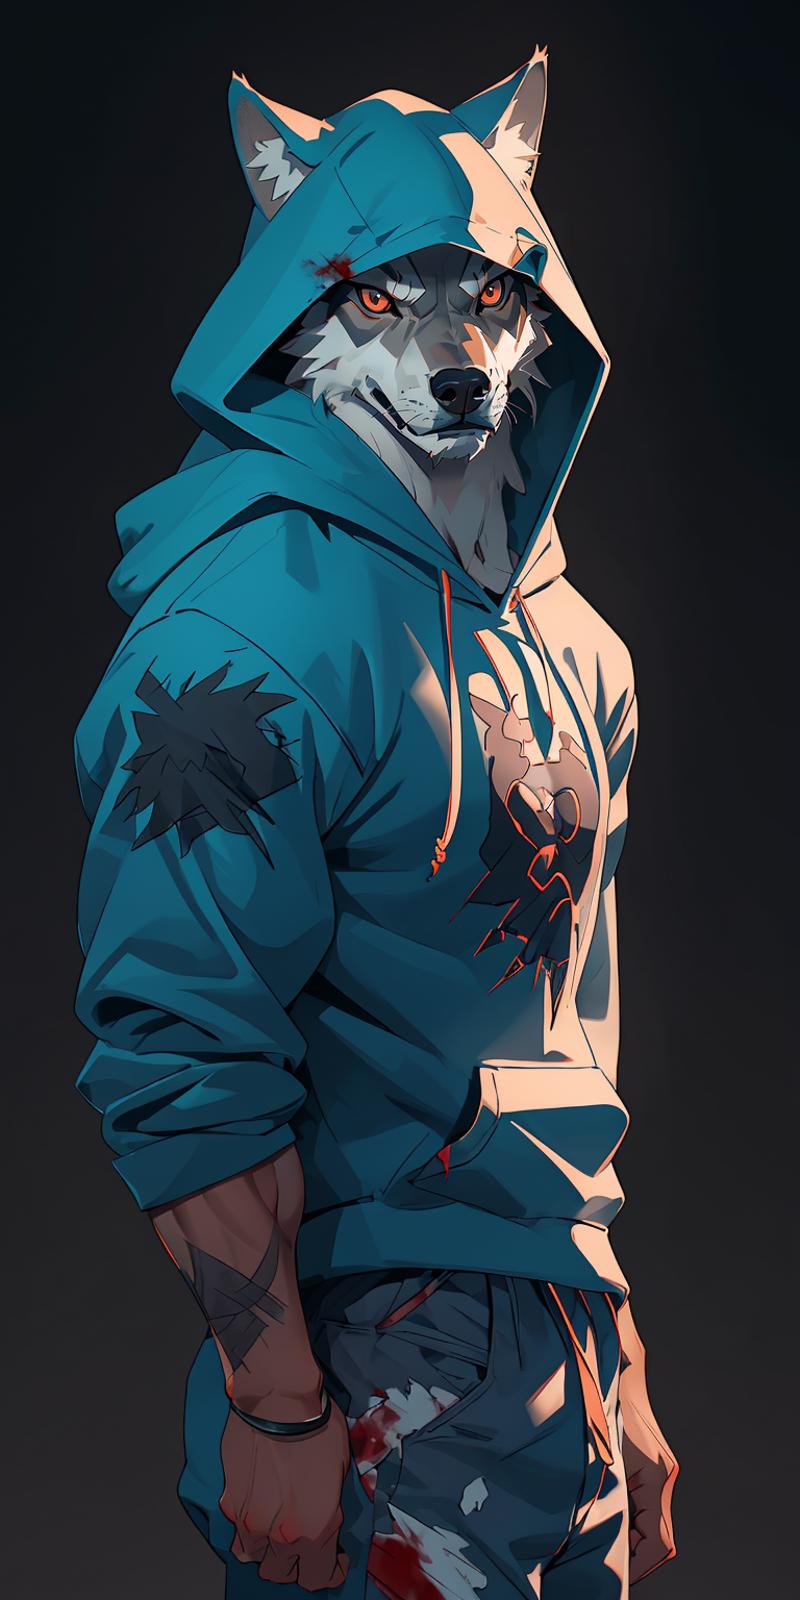 A man in a blue hoodie stands with his hand in his pocket.